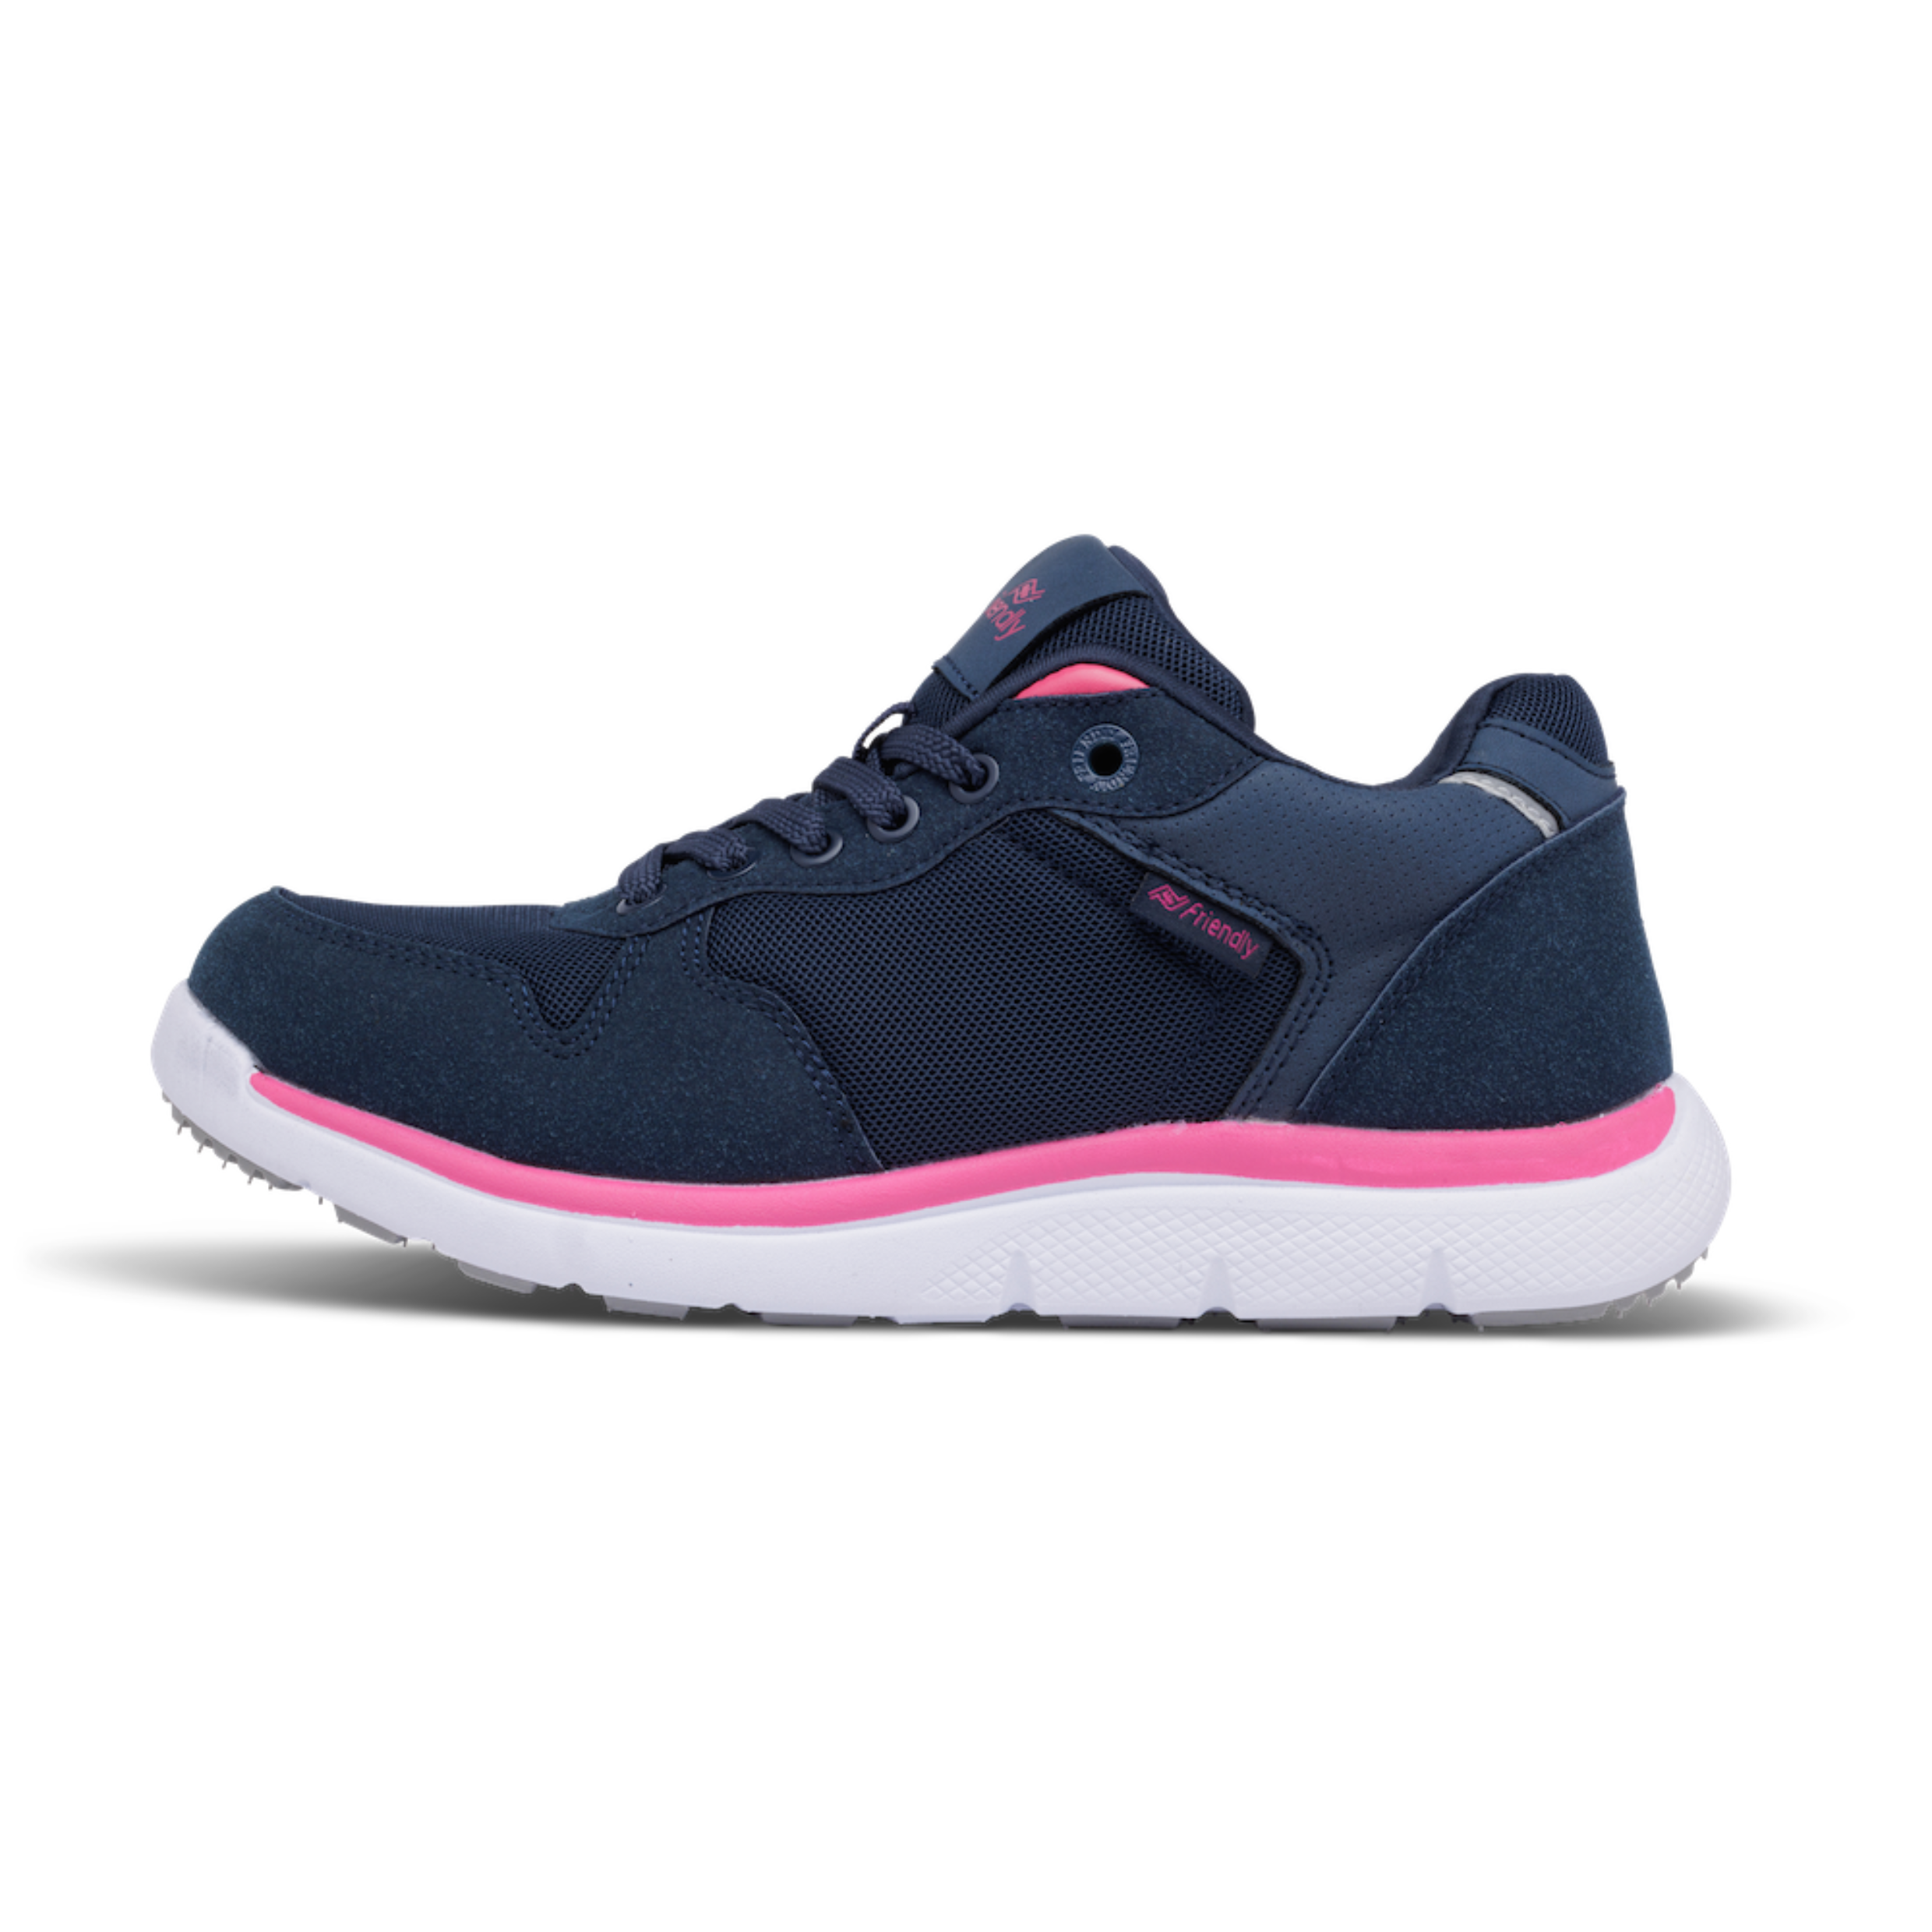 Friendly Shoes Excursion (Women's) - Mid Top Navy / Pink